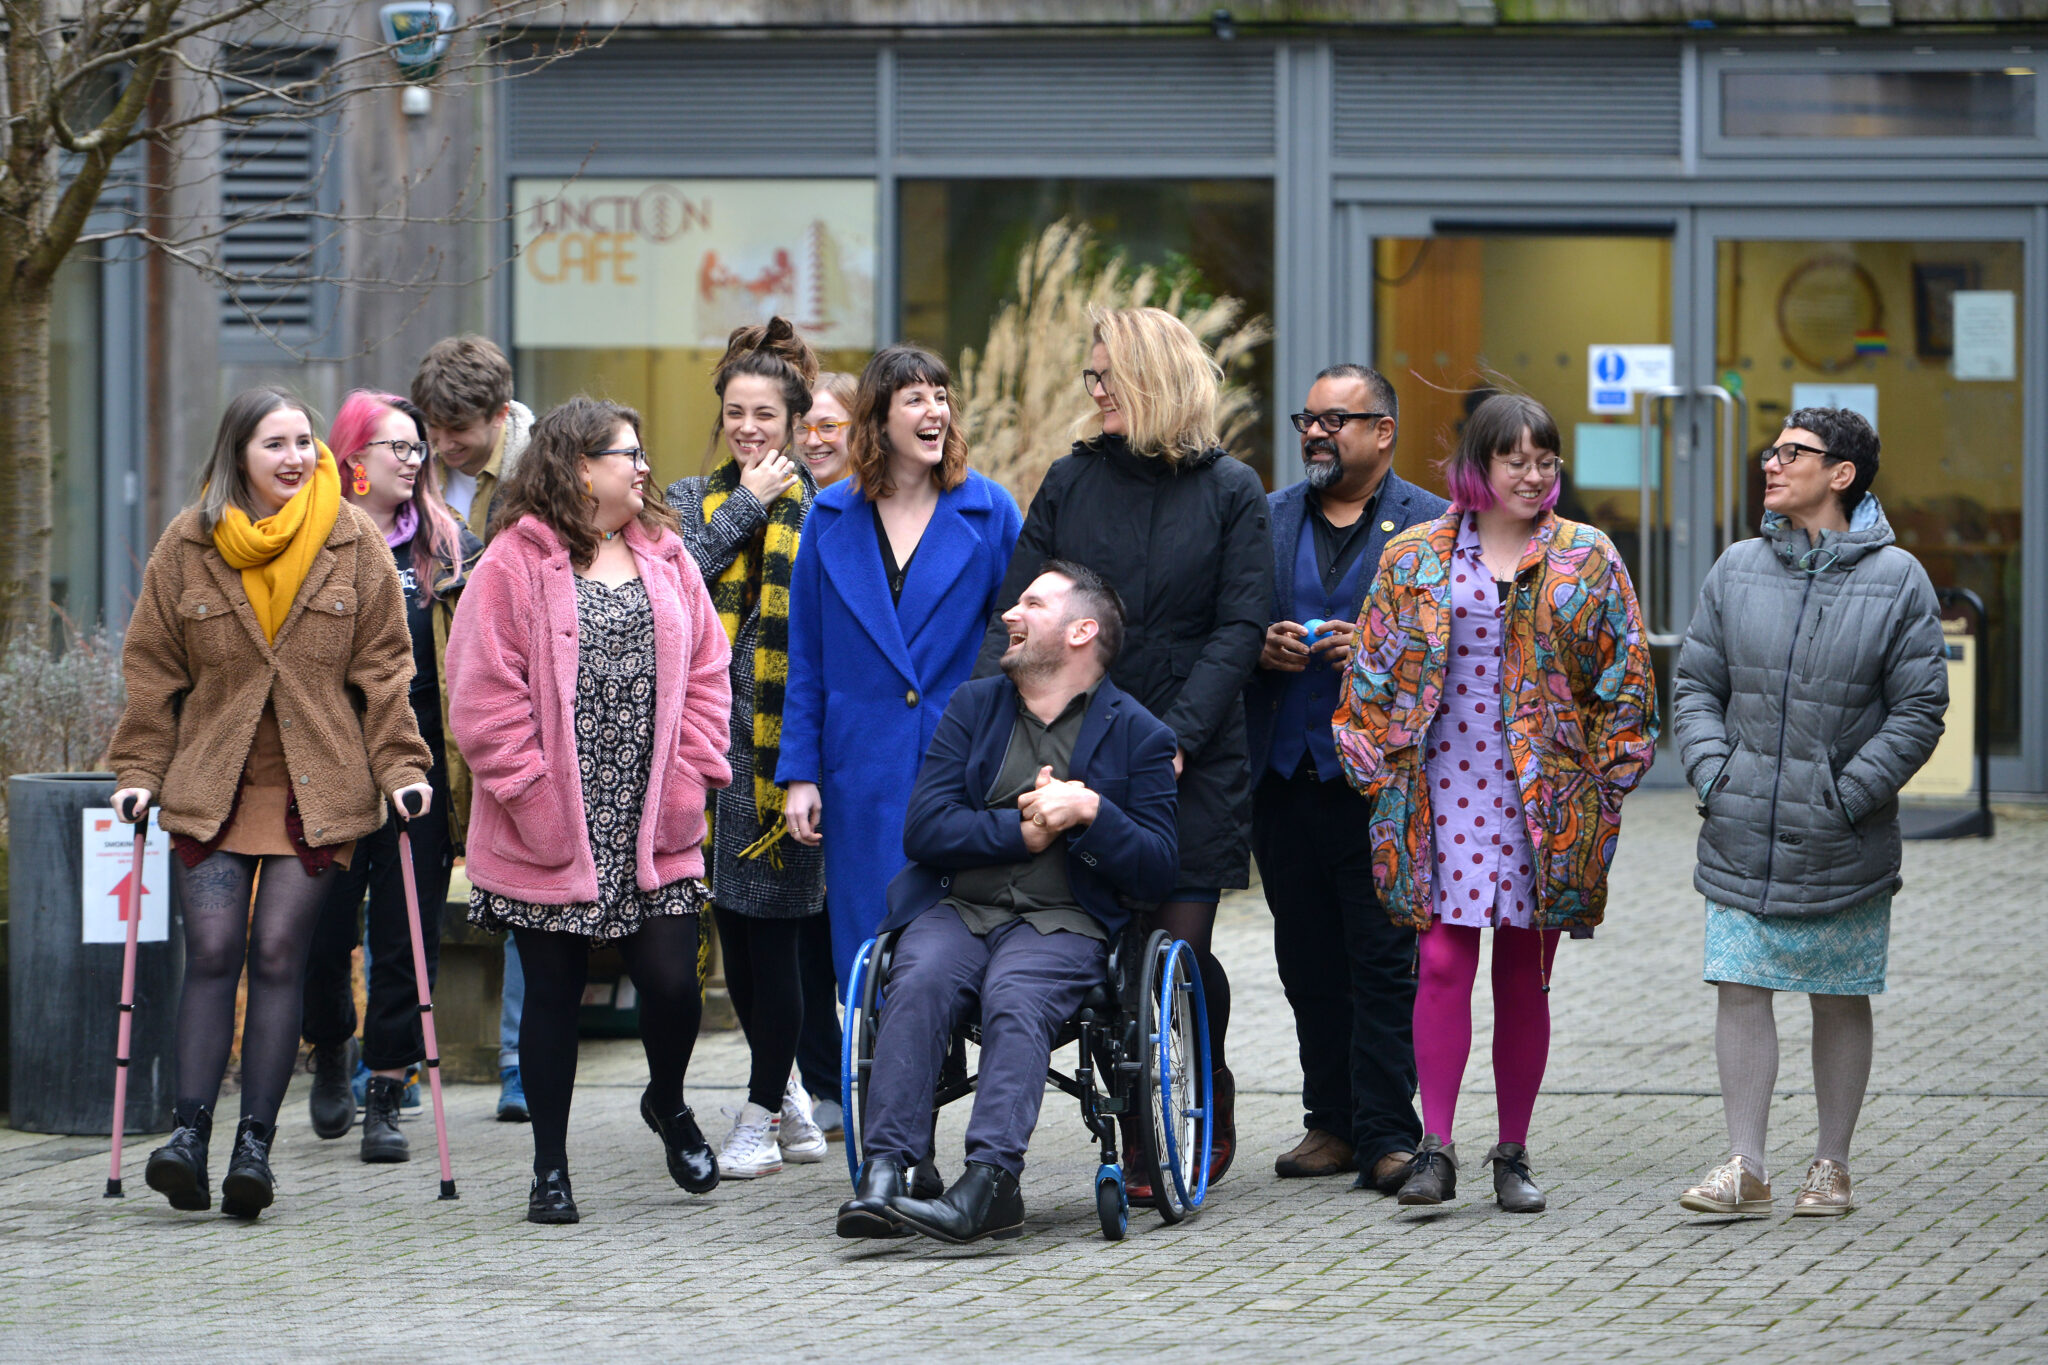 The D&A team outside their office in Brighton. They are walking or wheeling towards the camera, but are looking at each other, chatting and smiling as they go. They are a diverse mix of ages, races, disabilities and genders.